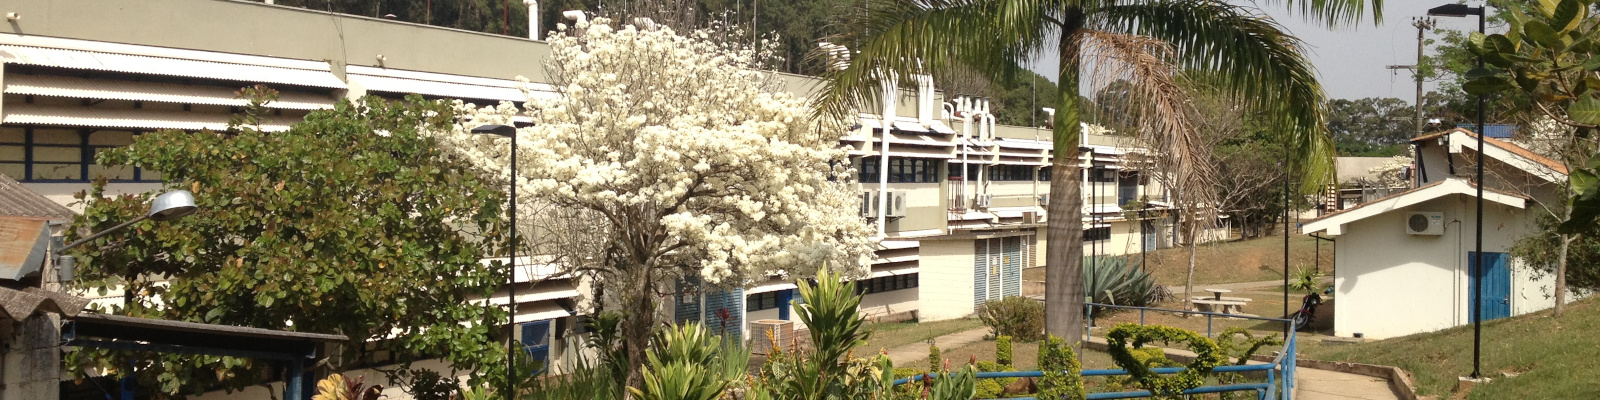 The image represents the northern façade of the UFSCar chemistry department. In the foreground, one can see the lawn and the presence of some trees and bushes, with a white ipê, the landmark of the department, standing out in the center of the image. In the background, it is possible to observe that the white façade of the building, has several windows and some apparent hydraulic installations due to the characteristic use of a laboratory.